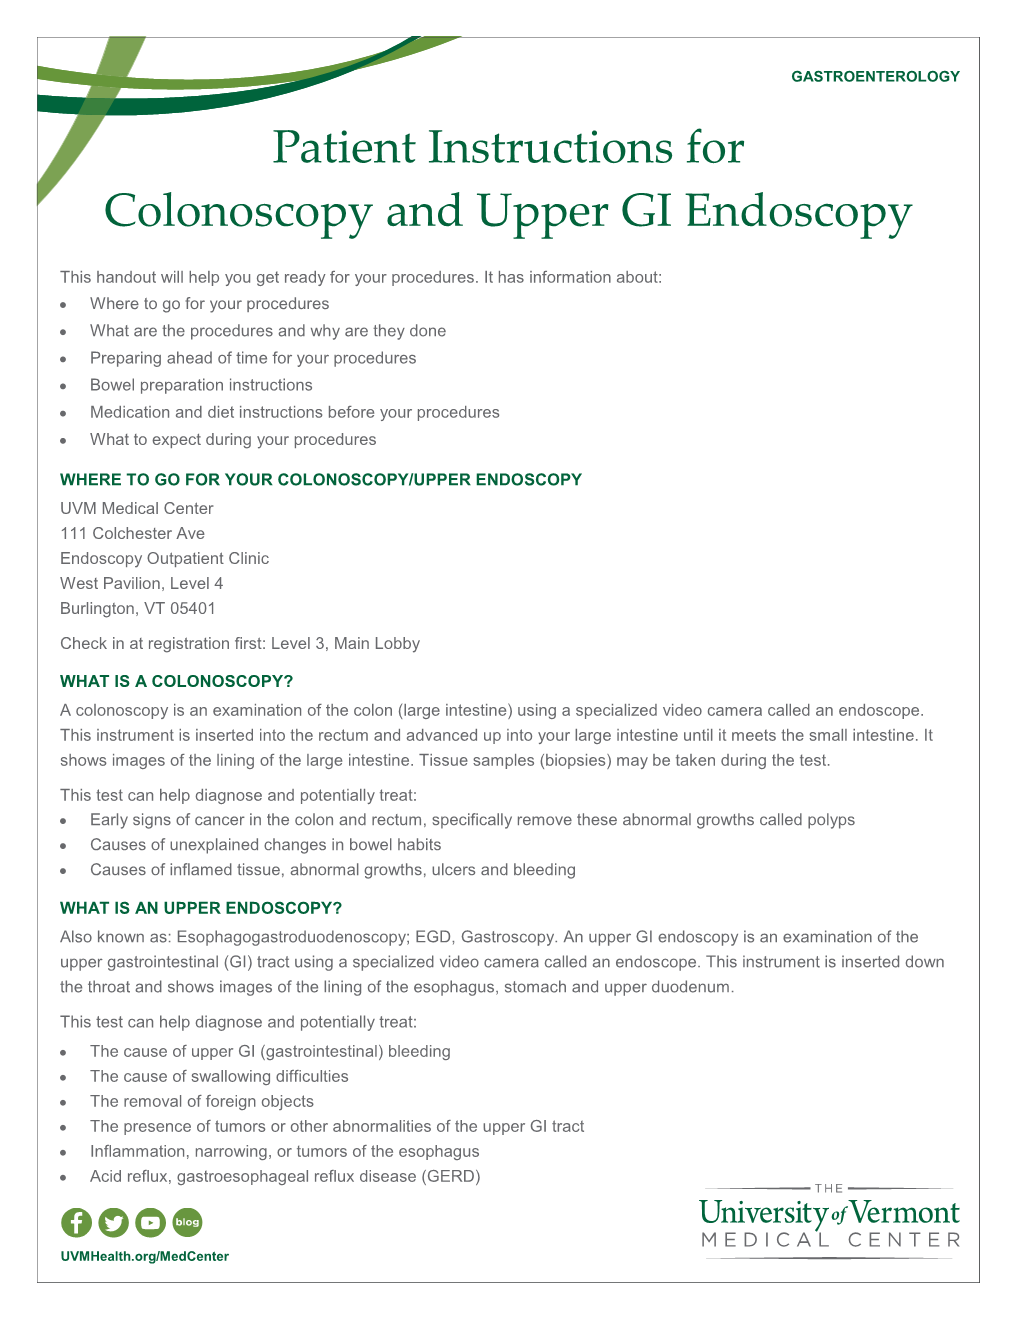 Patient Instructions for Colonoscopy and Upper GI Endoscopy